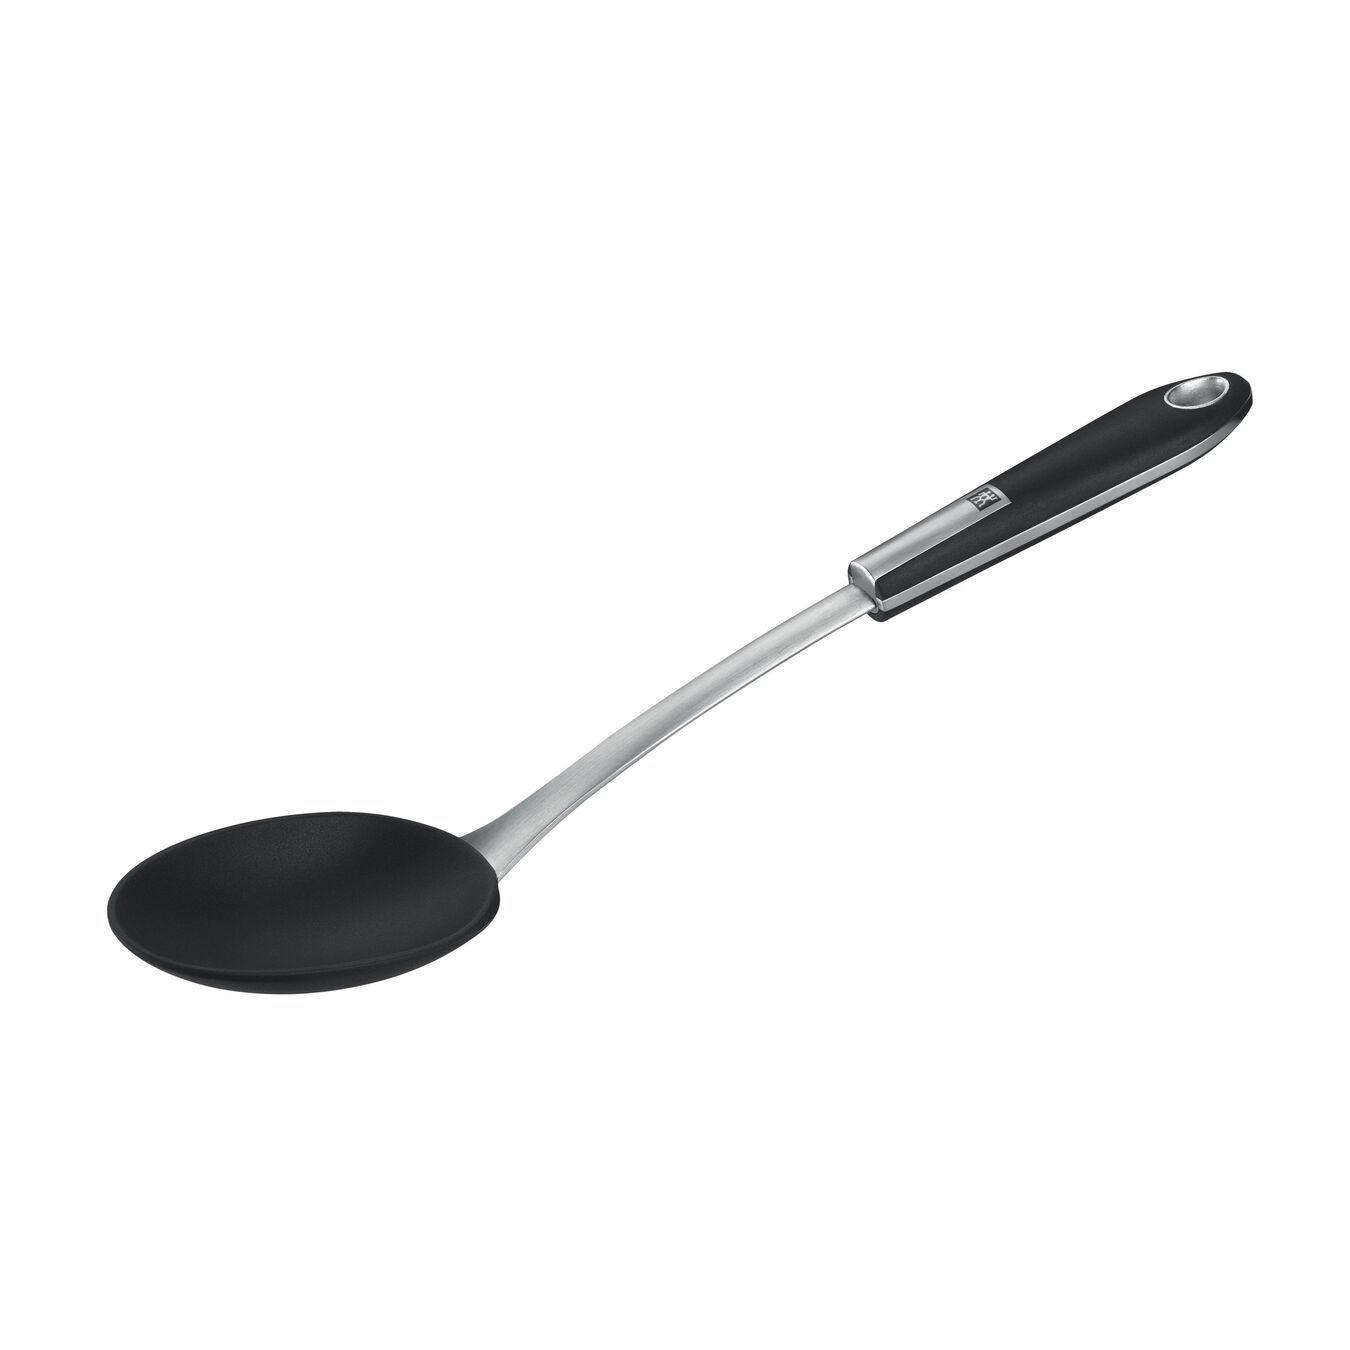 Serving spoon, 40 cm, 18/10 Stainless Steel,,large 1